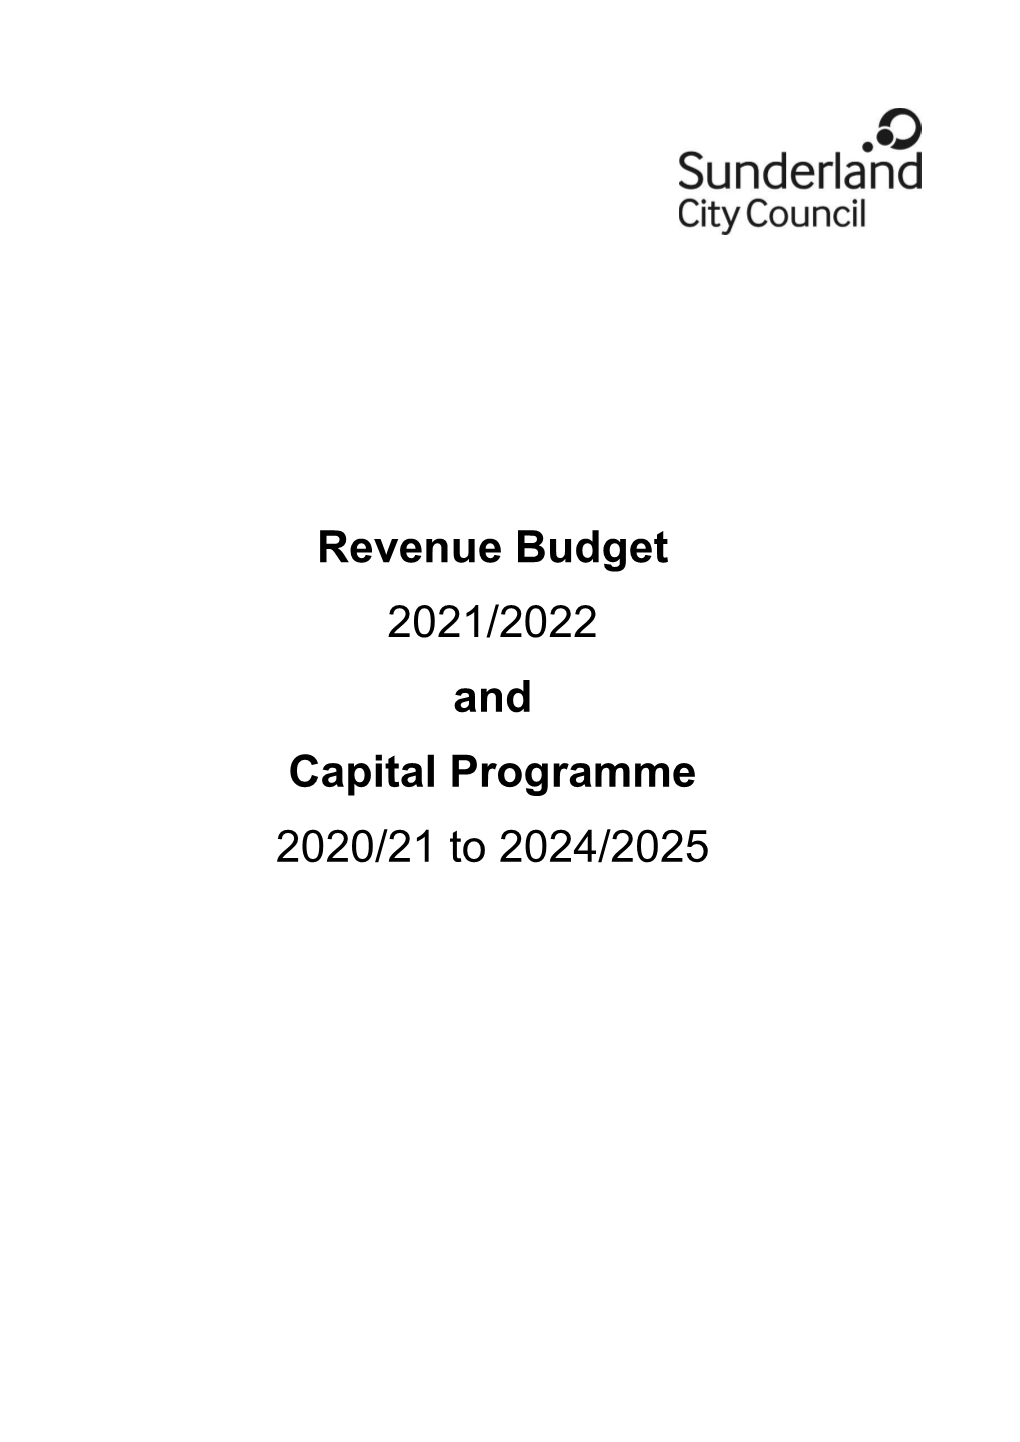 Revenue Budget 2021/2022 and Capital Programme 2020/21 To